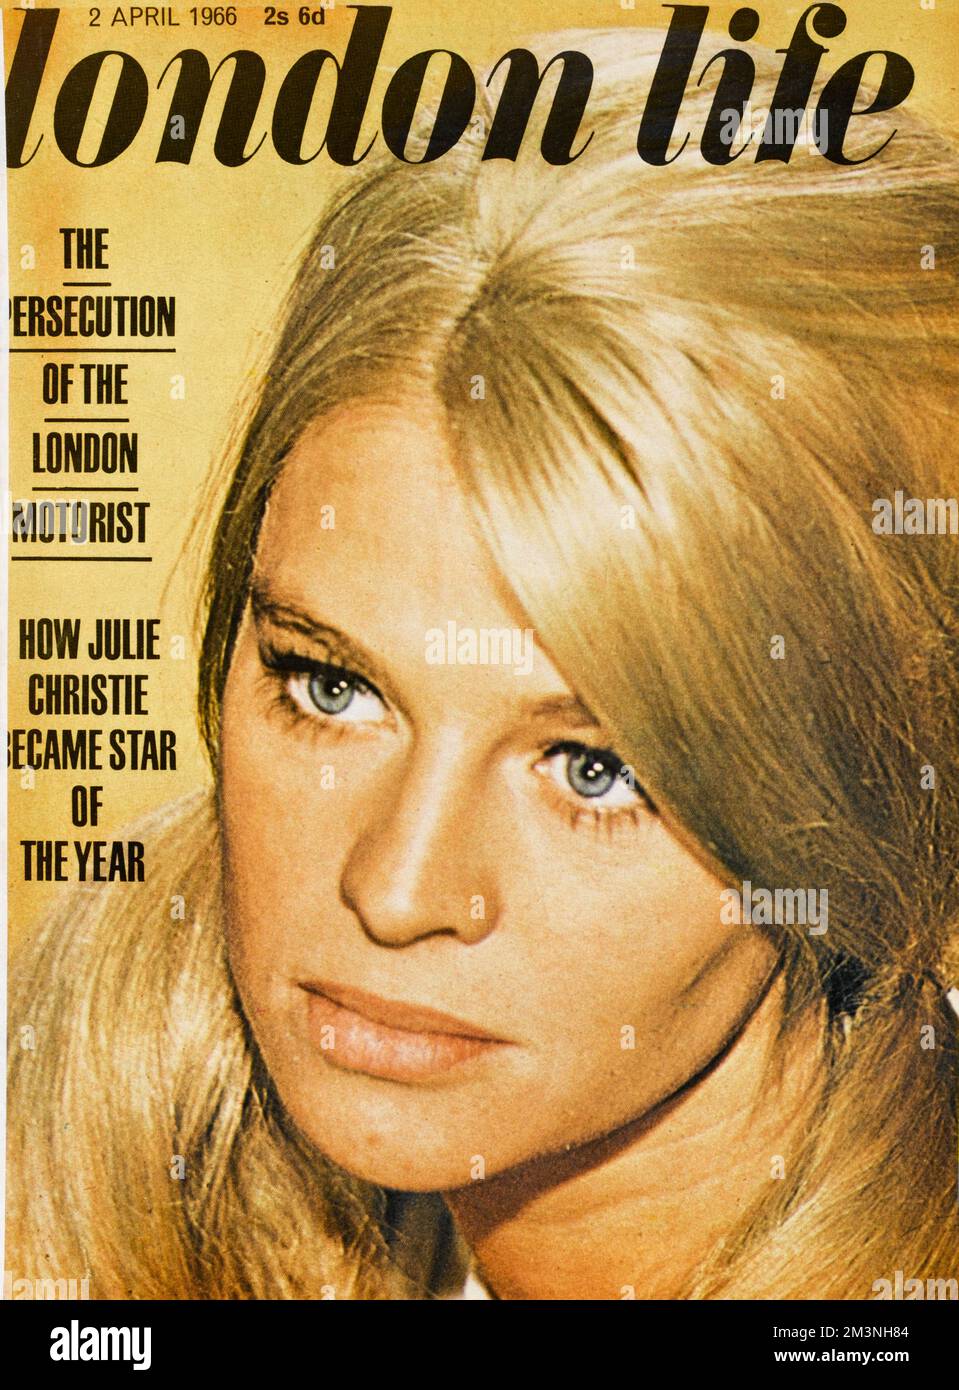 Front cover of the impossibly groovy London Life magazine which ran for just two years between 1965 and 1966 but chronicled the life and times of swinging sixties London.  Here, actress Julie Christie is its cover girl.     Date: 1966 Stock Photo